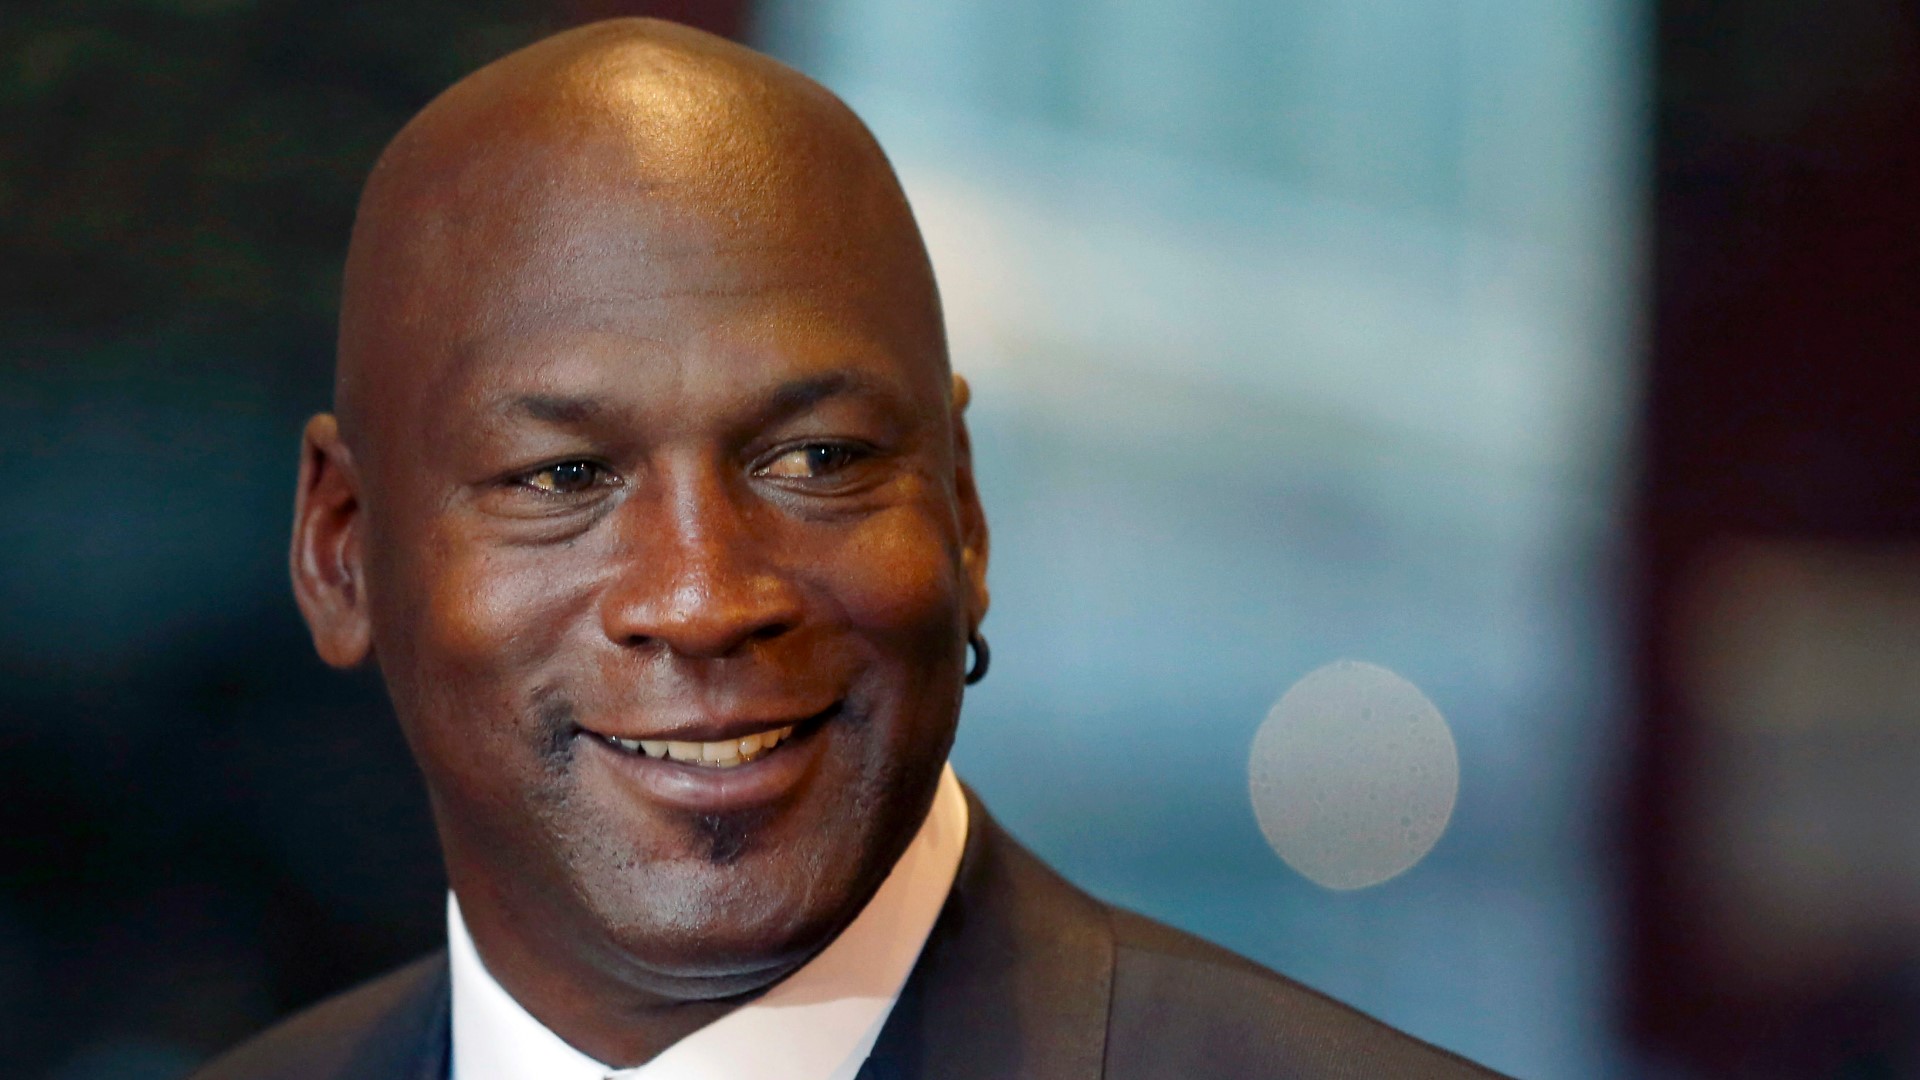 Even though Hornets owner Michael Jordan is selling a piece of the team, he is still "by far" the majority owner.